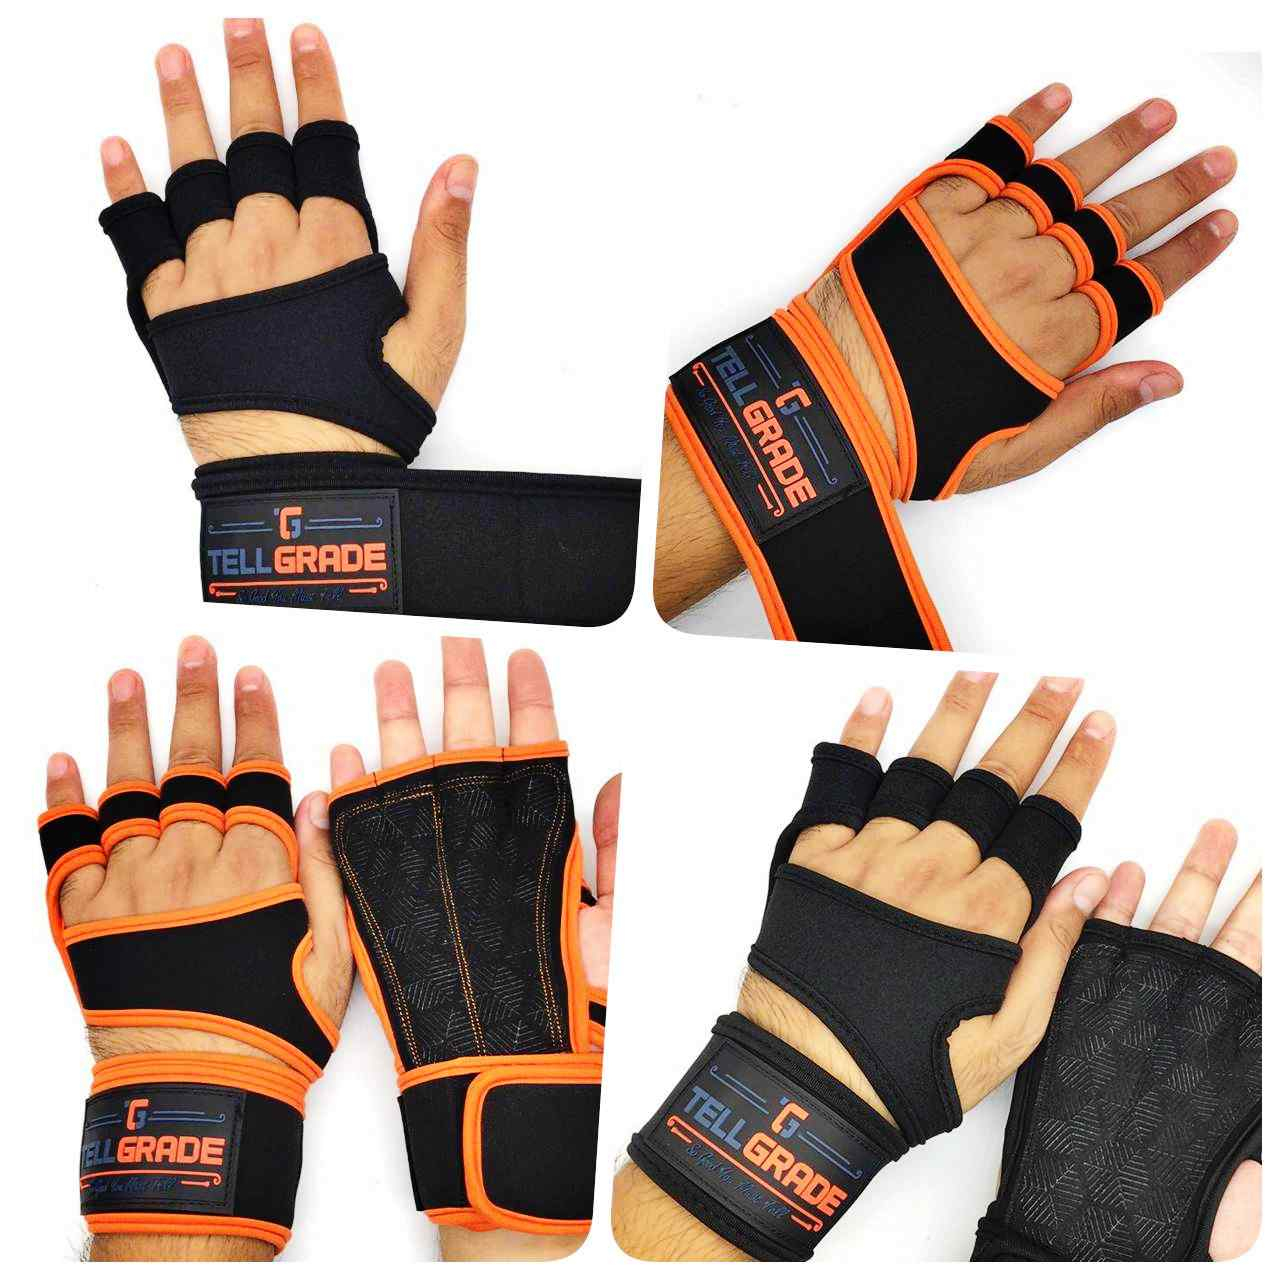 Tellgrade New Ventilated Weight Lifting Gloves With Wrist Wraps &Amp;&Nbsp;Full Palm Protection